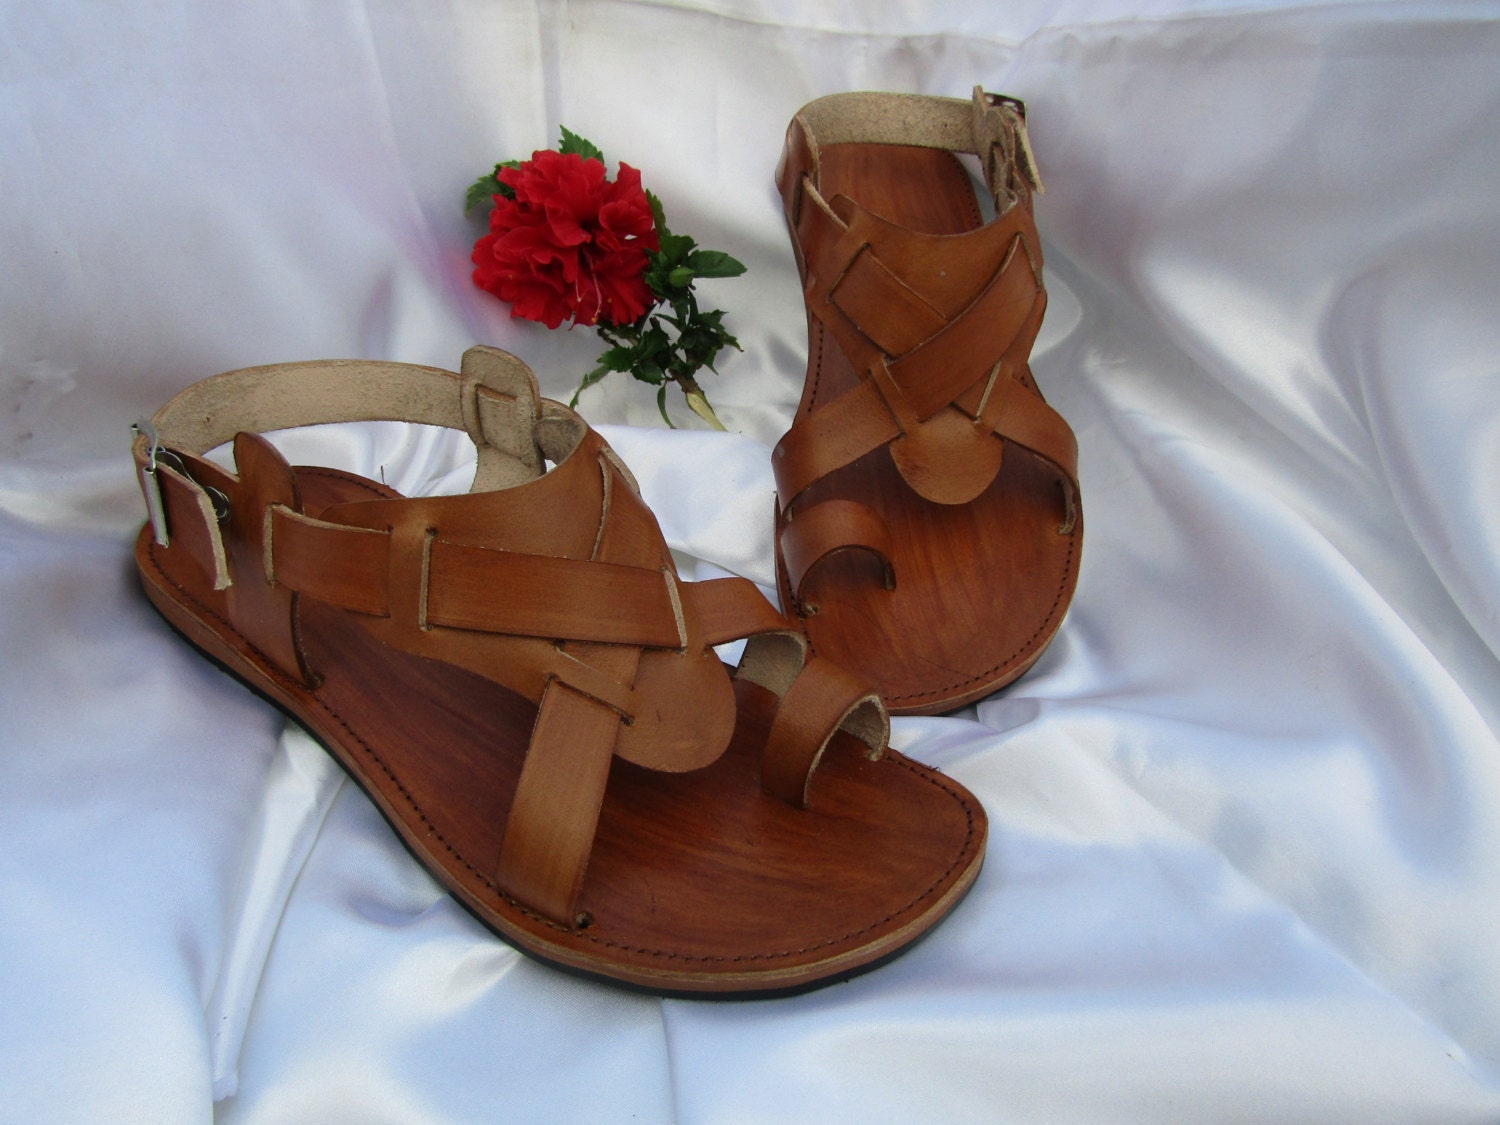 Toe ring sandals/Sandals for women and men by handicraftafrica